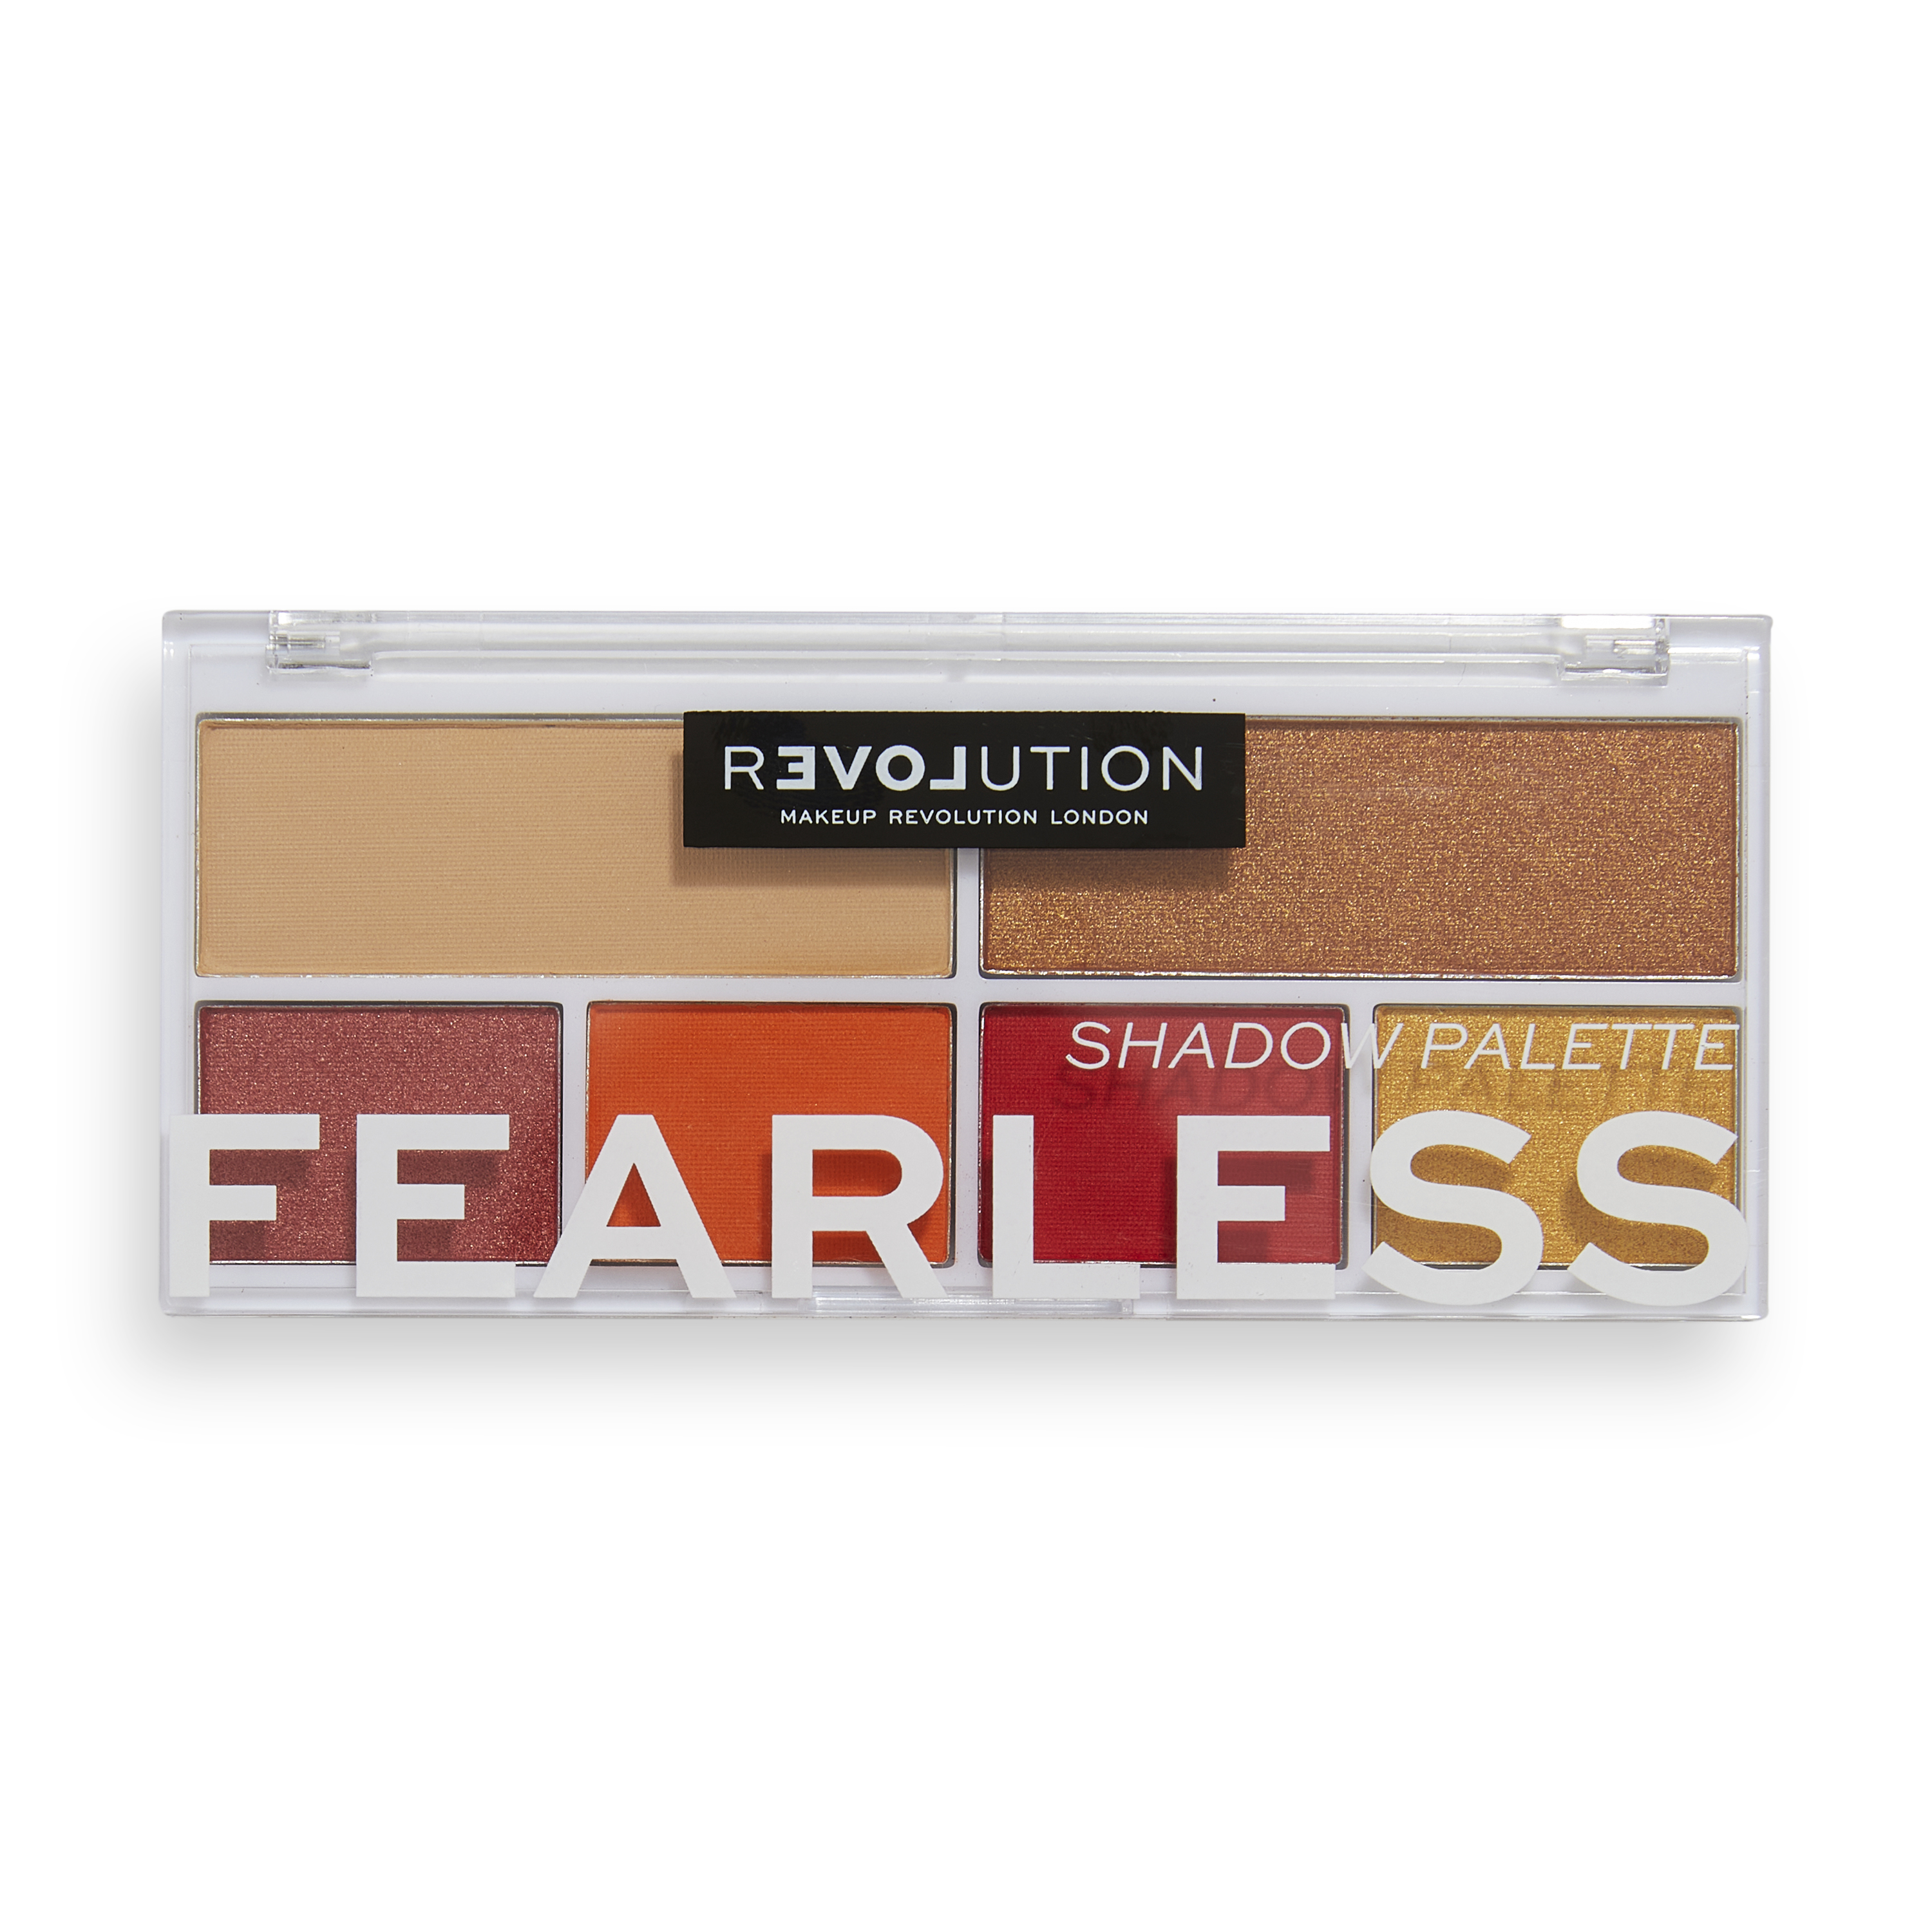 Relove by Revolution Colour Play Eyeshadow Palette - Fearless - image 1 of 5